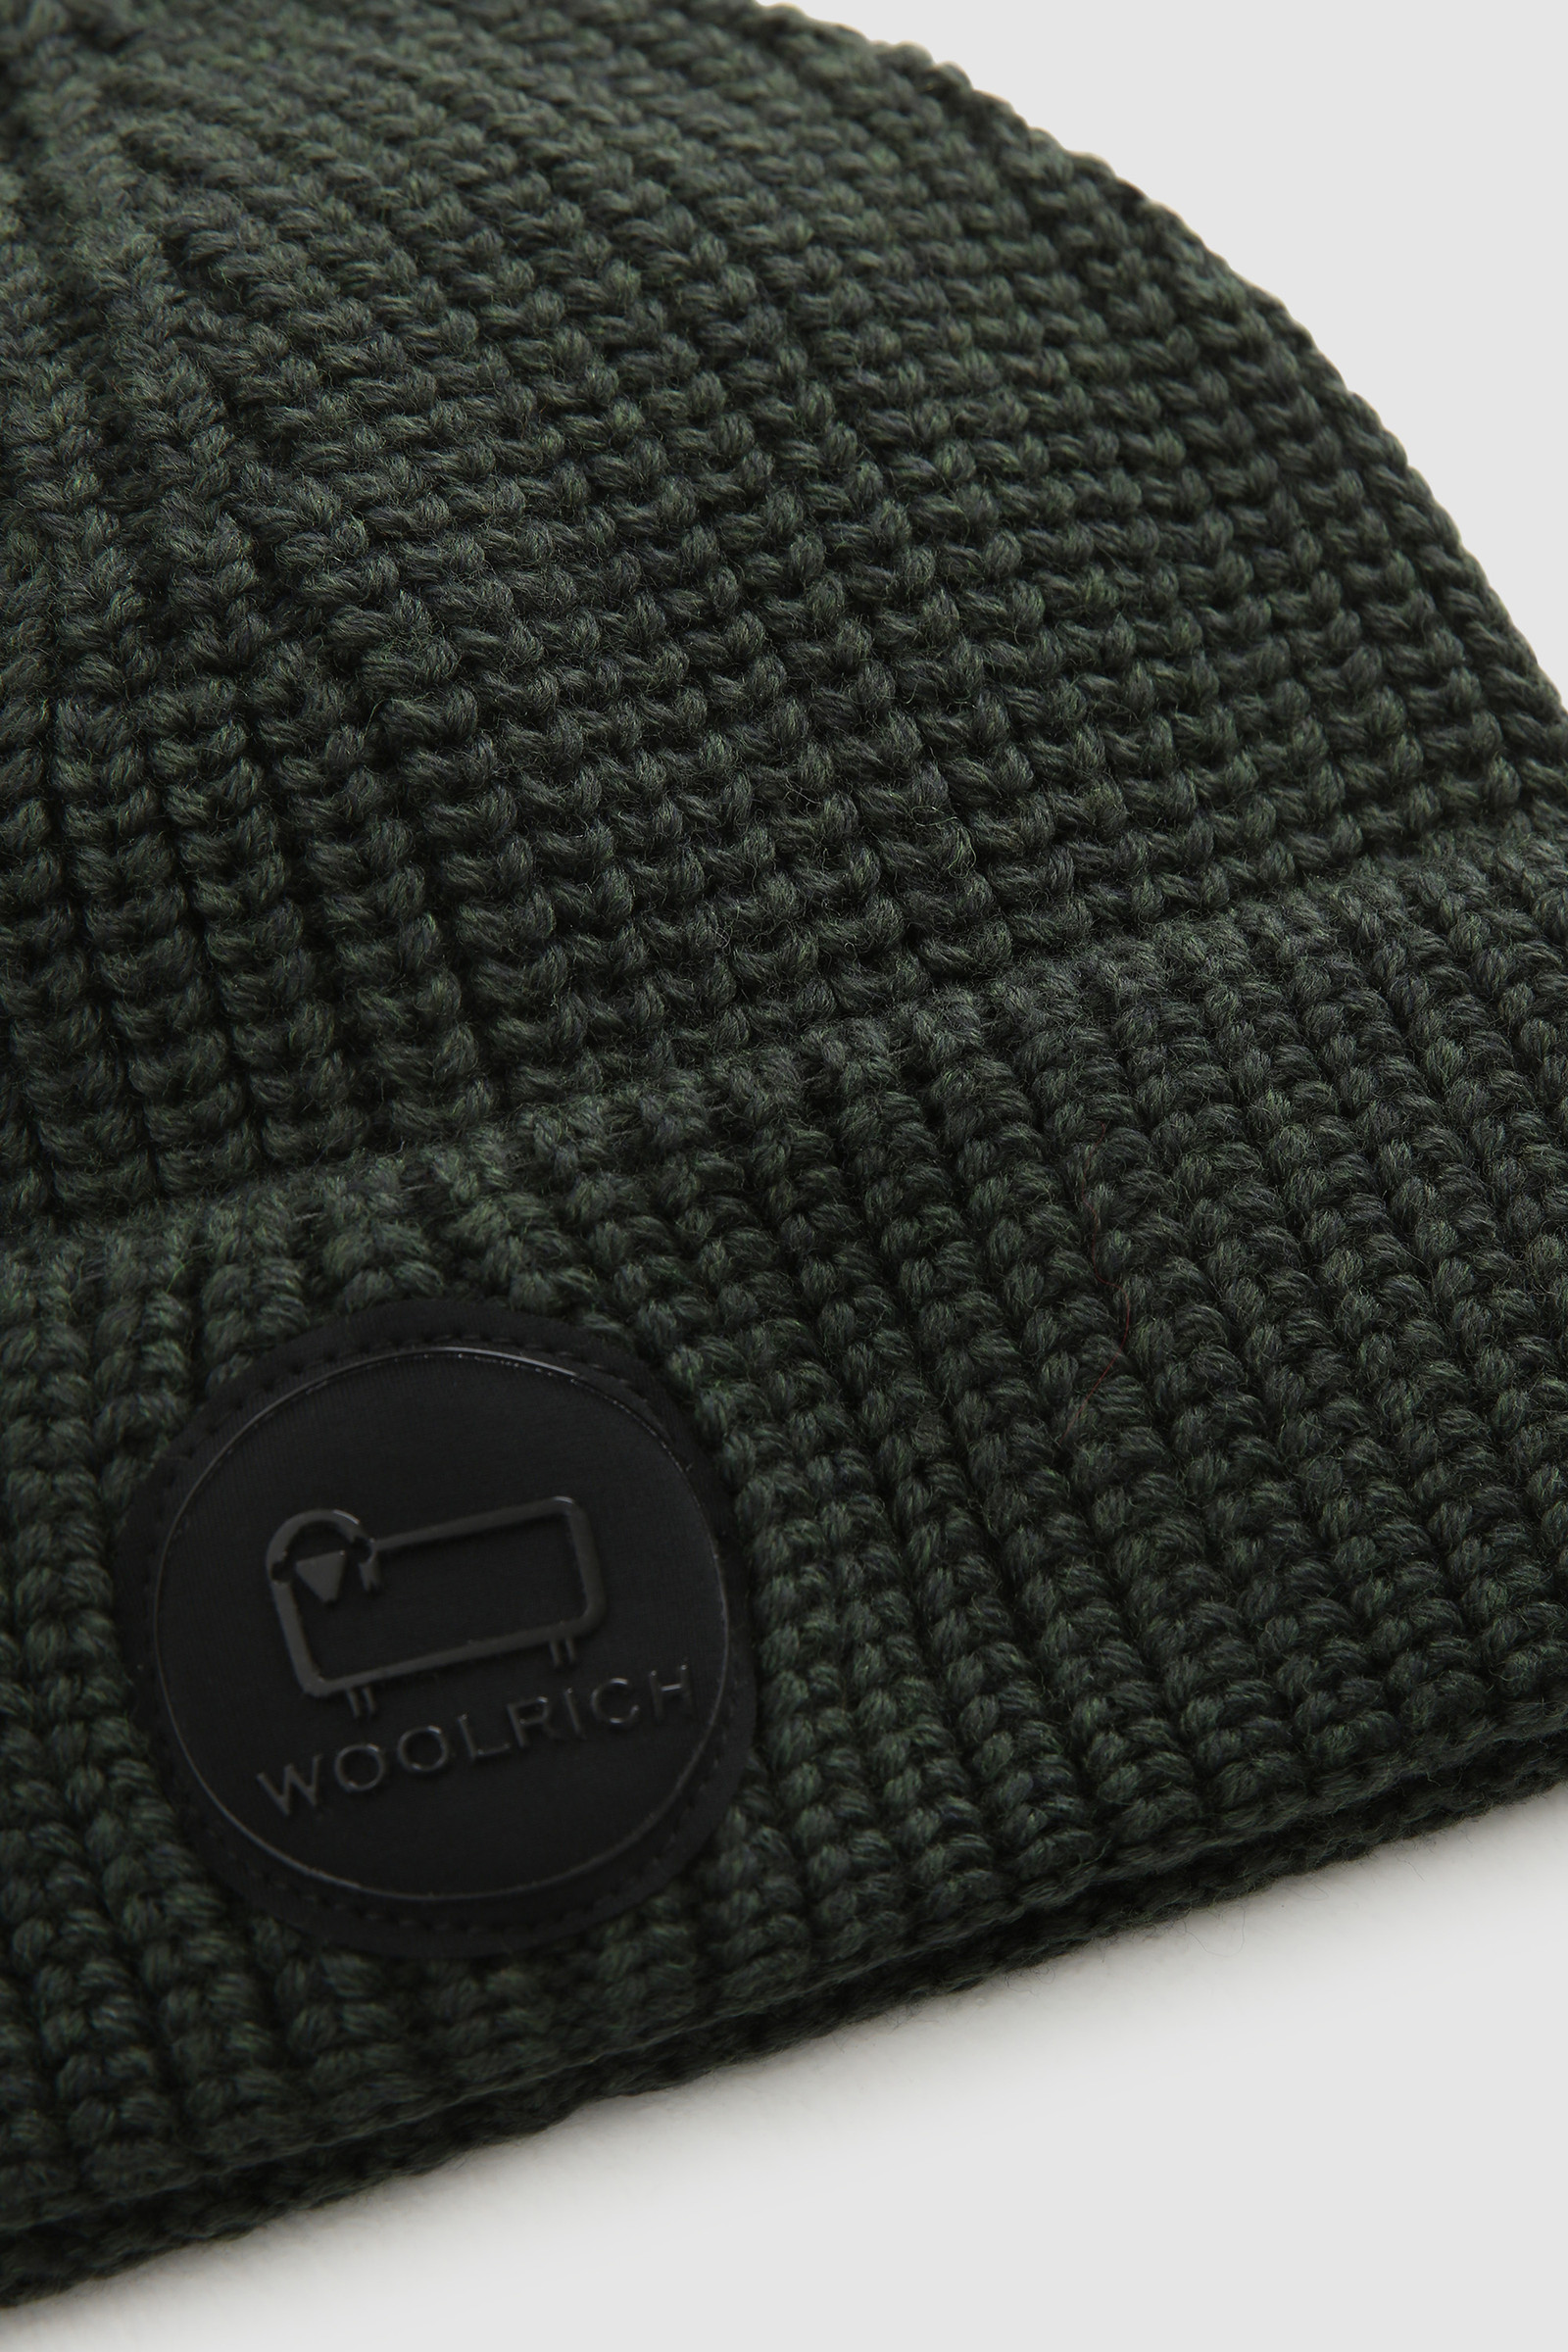 Save 41% Mens Hats Woolrich Hats Woolrich Beanie With Patch in Green for Men 